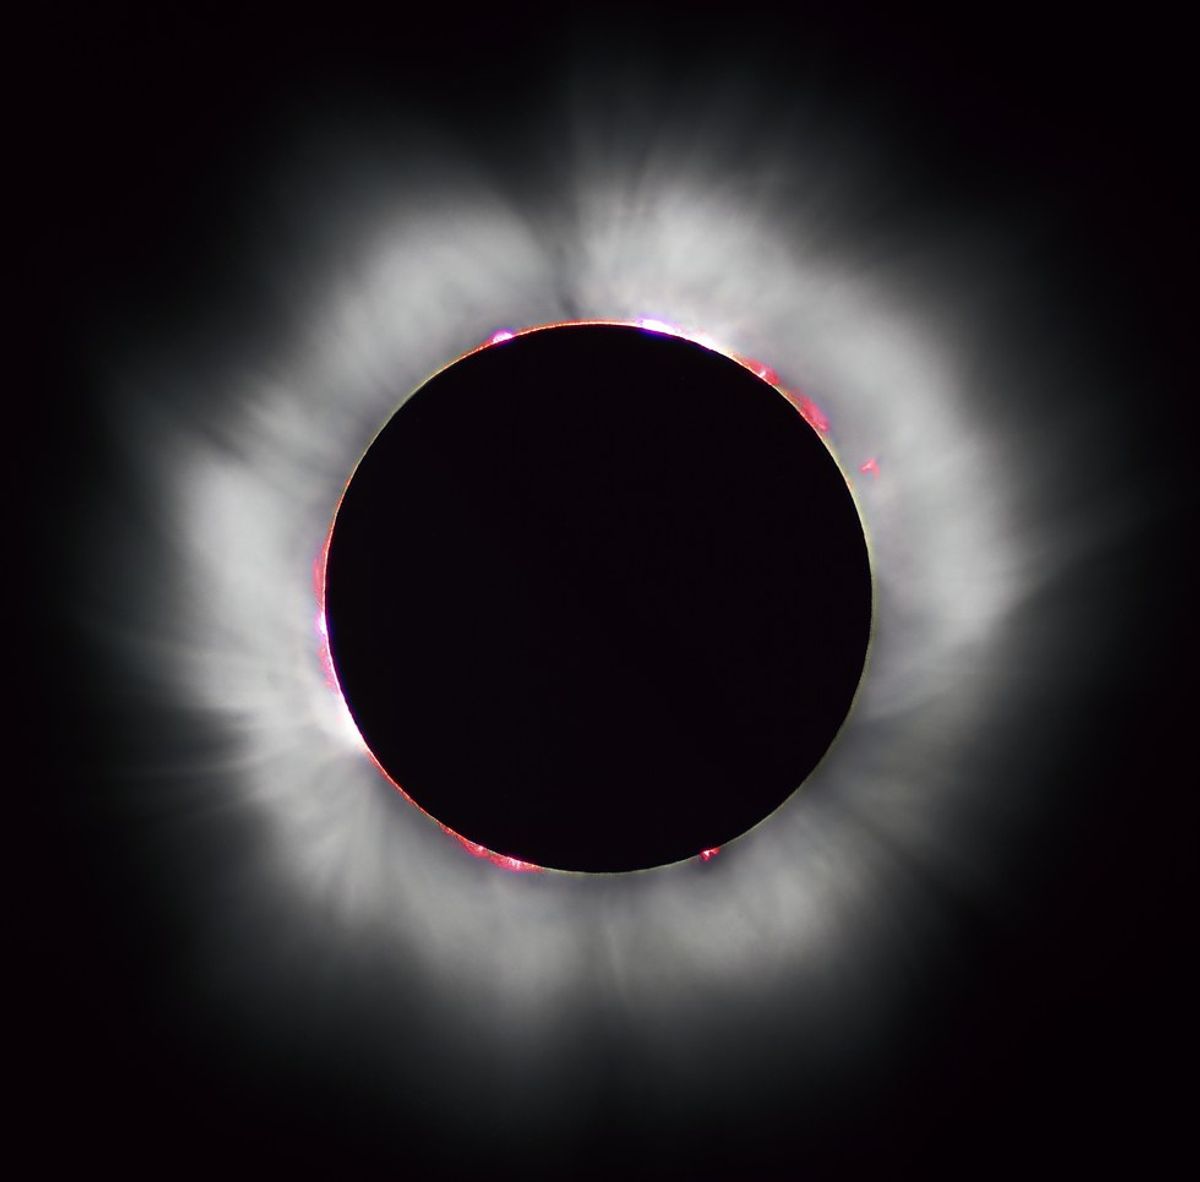 The Next Solar Eclipse That We Can See